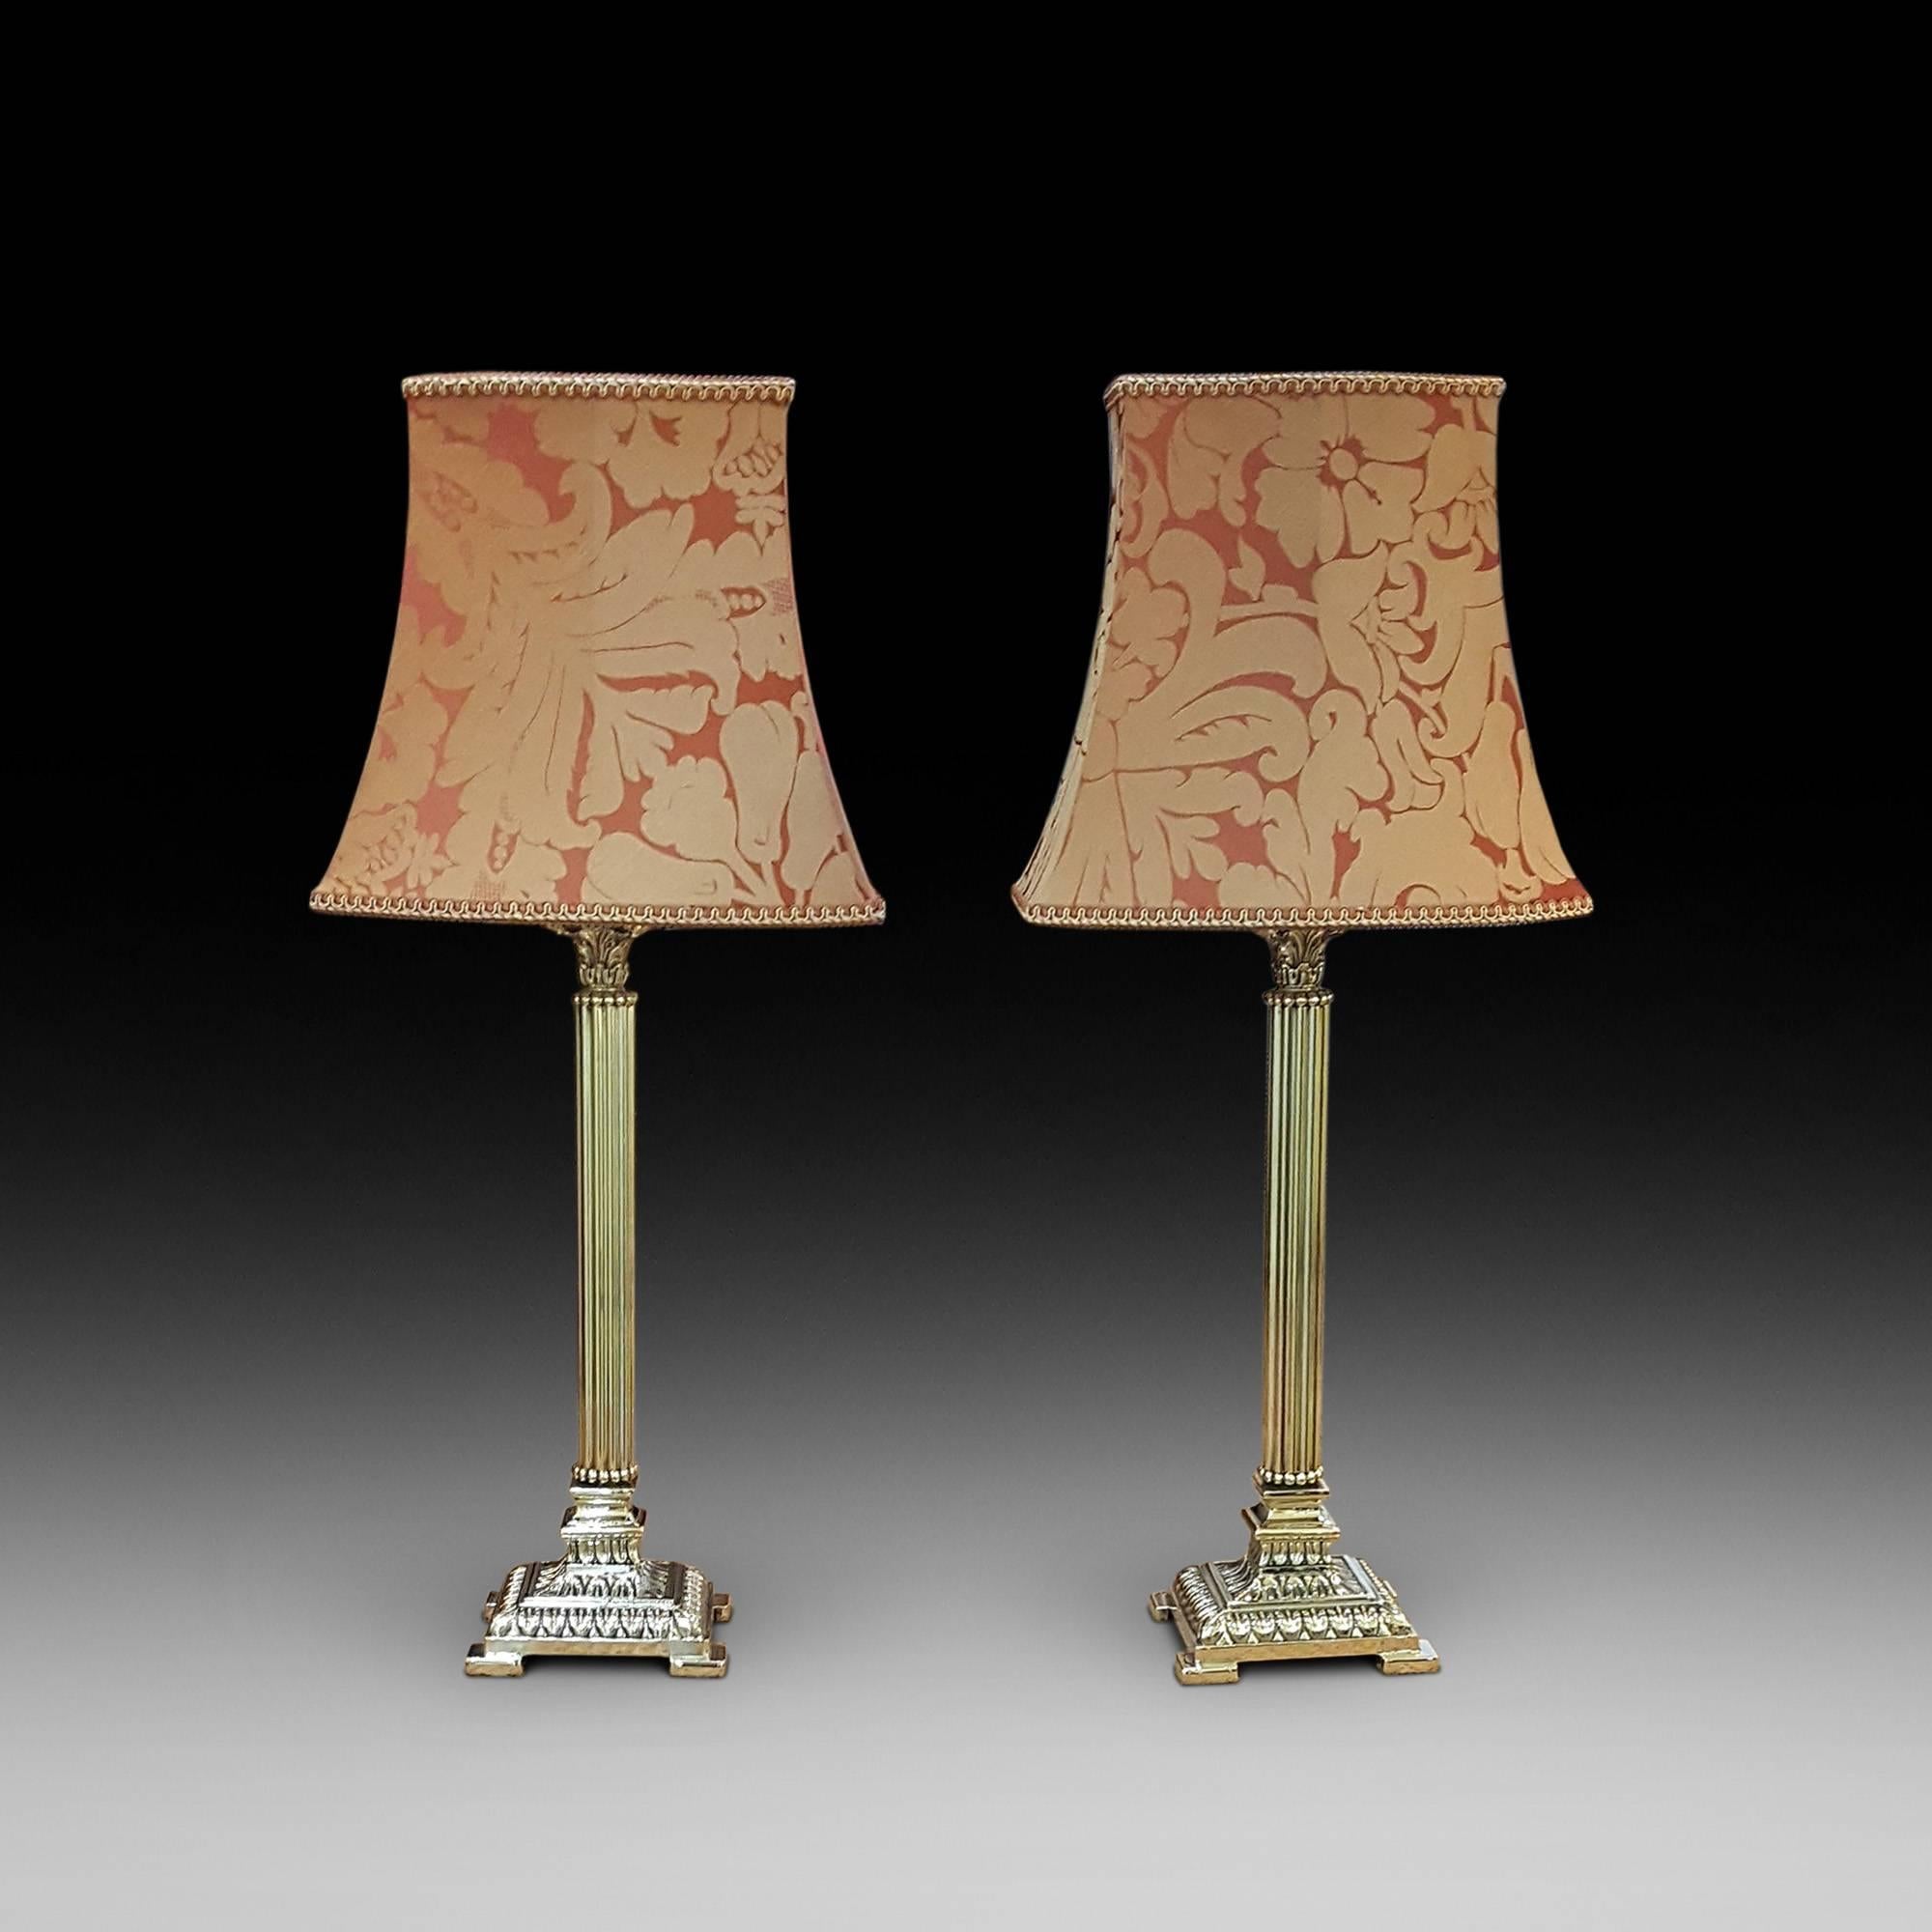 Pair of 1930s brass Corinthian column table lamps. The lampshade(s) are newly handmade silks by the same maker as provides the shades for Downton Abbey - all lights and lamps have been rewired with authentic corded flex, fitted with either foot